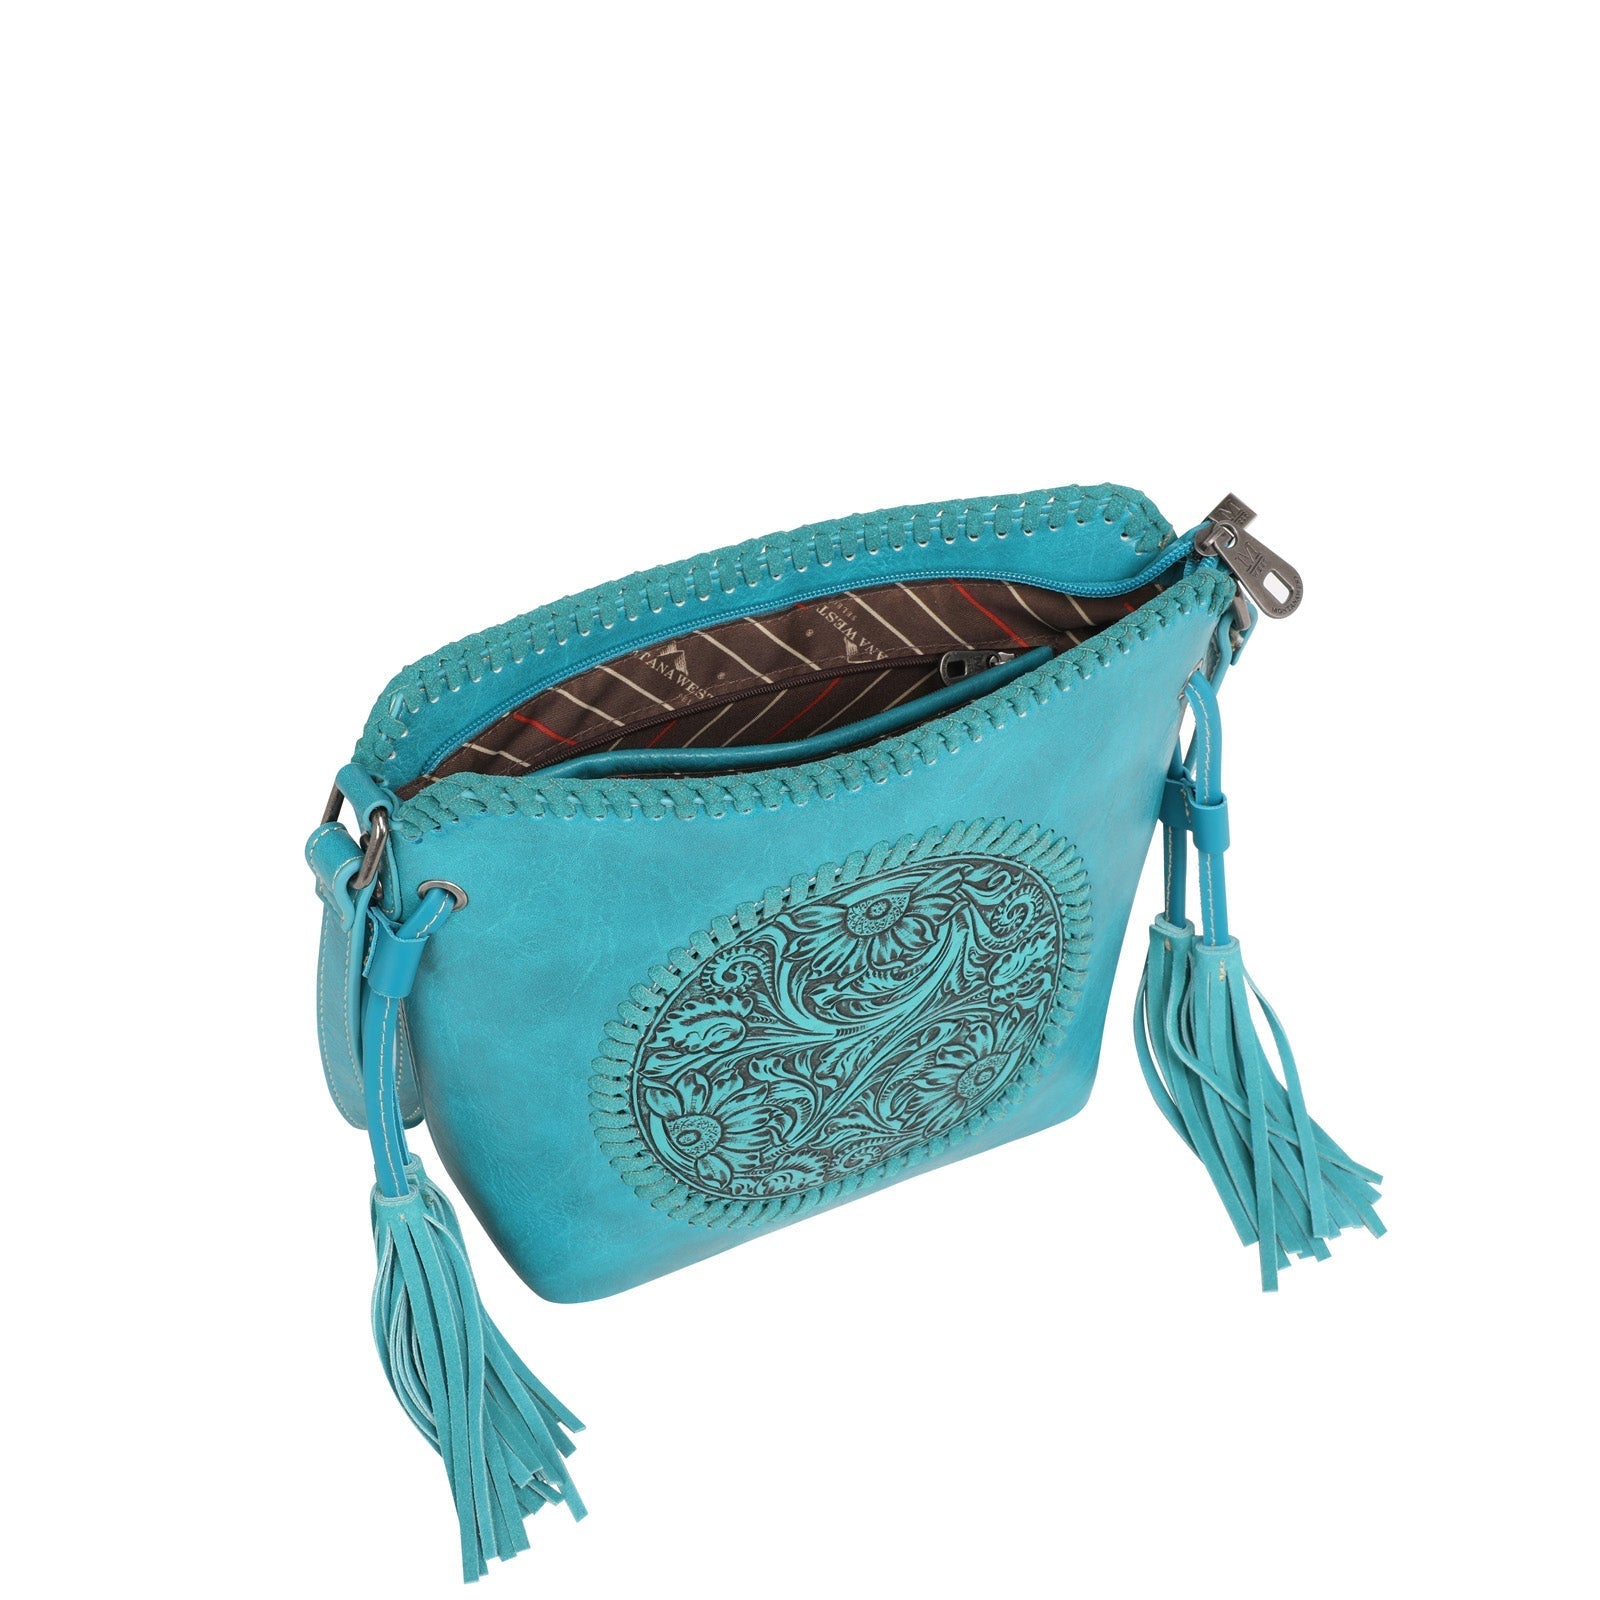 Montana West Embossed Collection Saddle Bag - Coffee - Cowgirl Wear